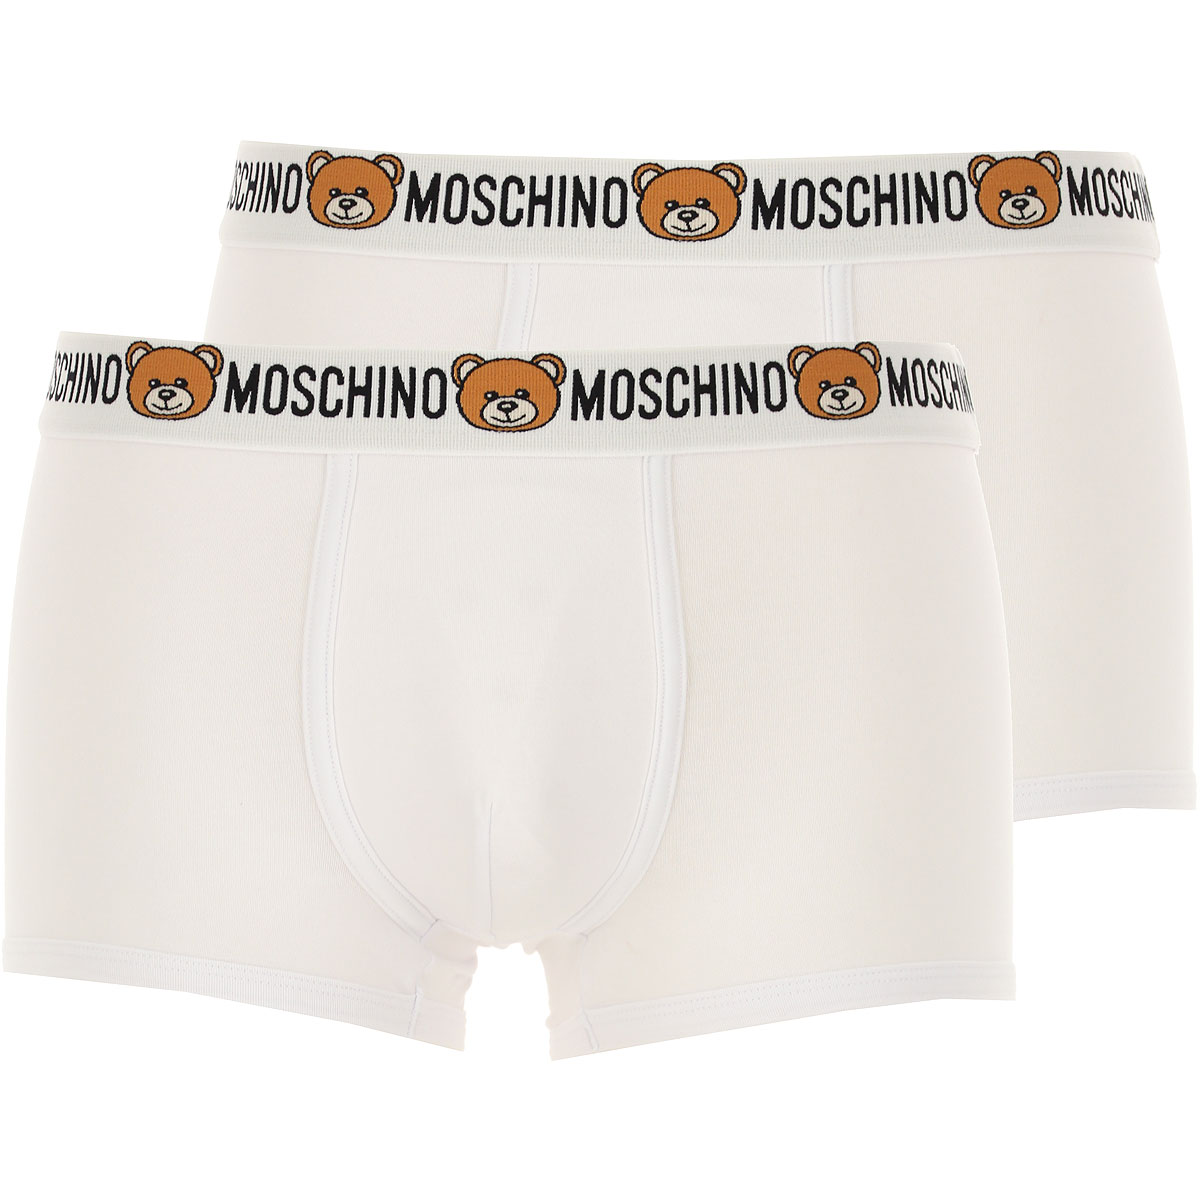 Mens Underwear Moschino, Style code: cont-a4770-8119